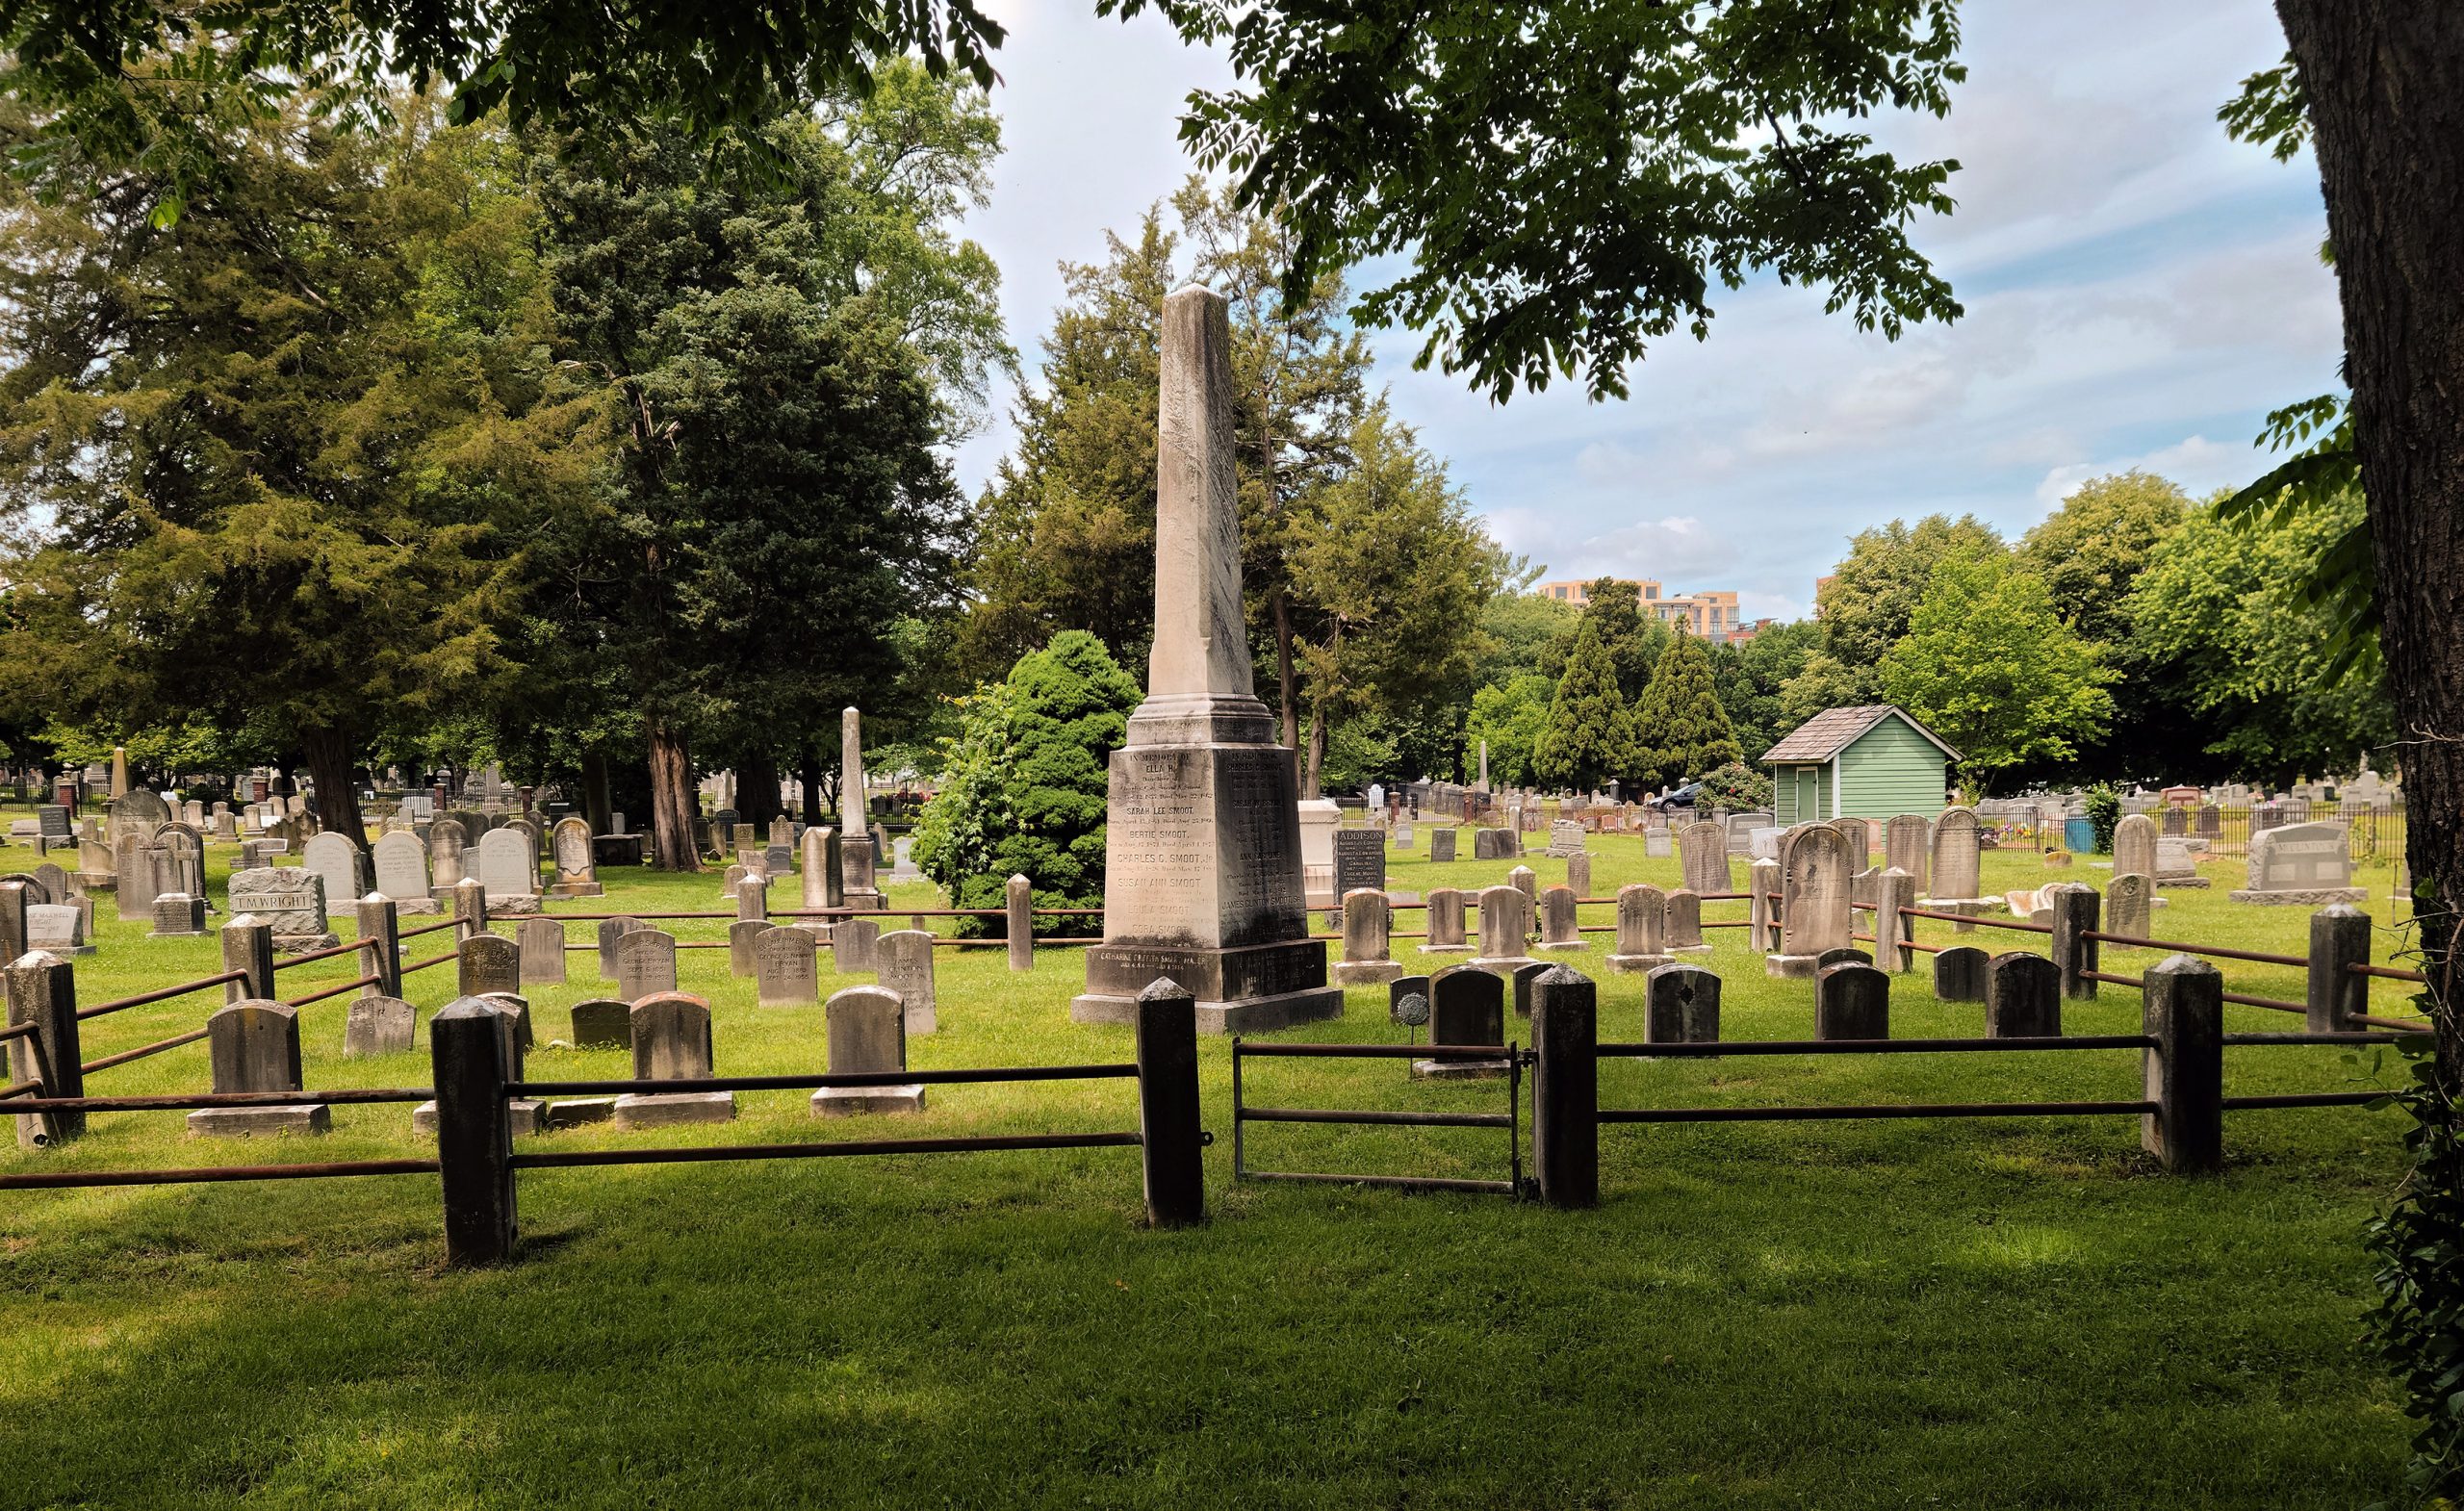 100-0143_St_Pauls_Episcopal_Cemetery_2022_VLR_Online-scaled